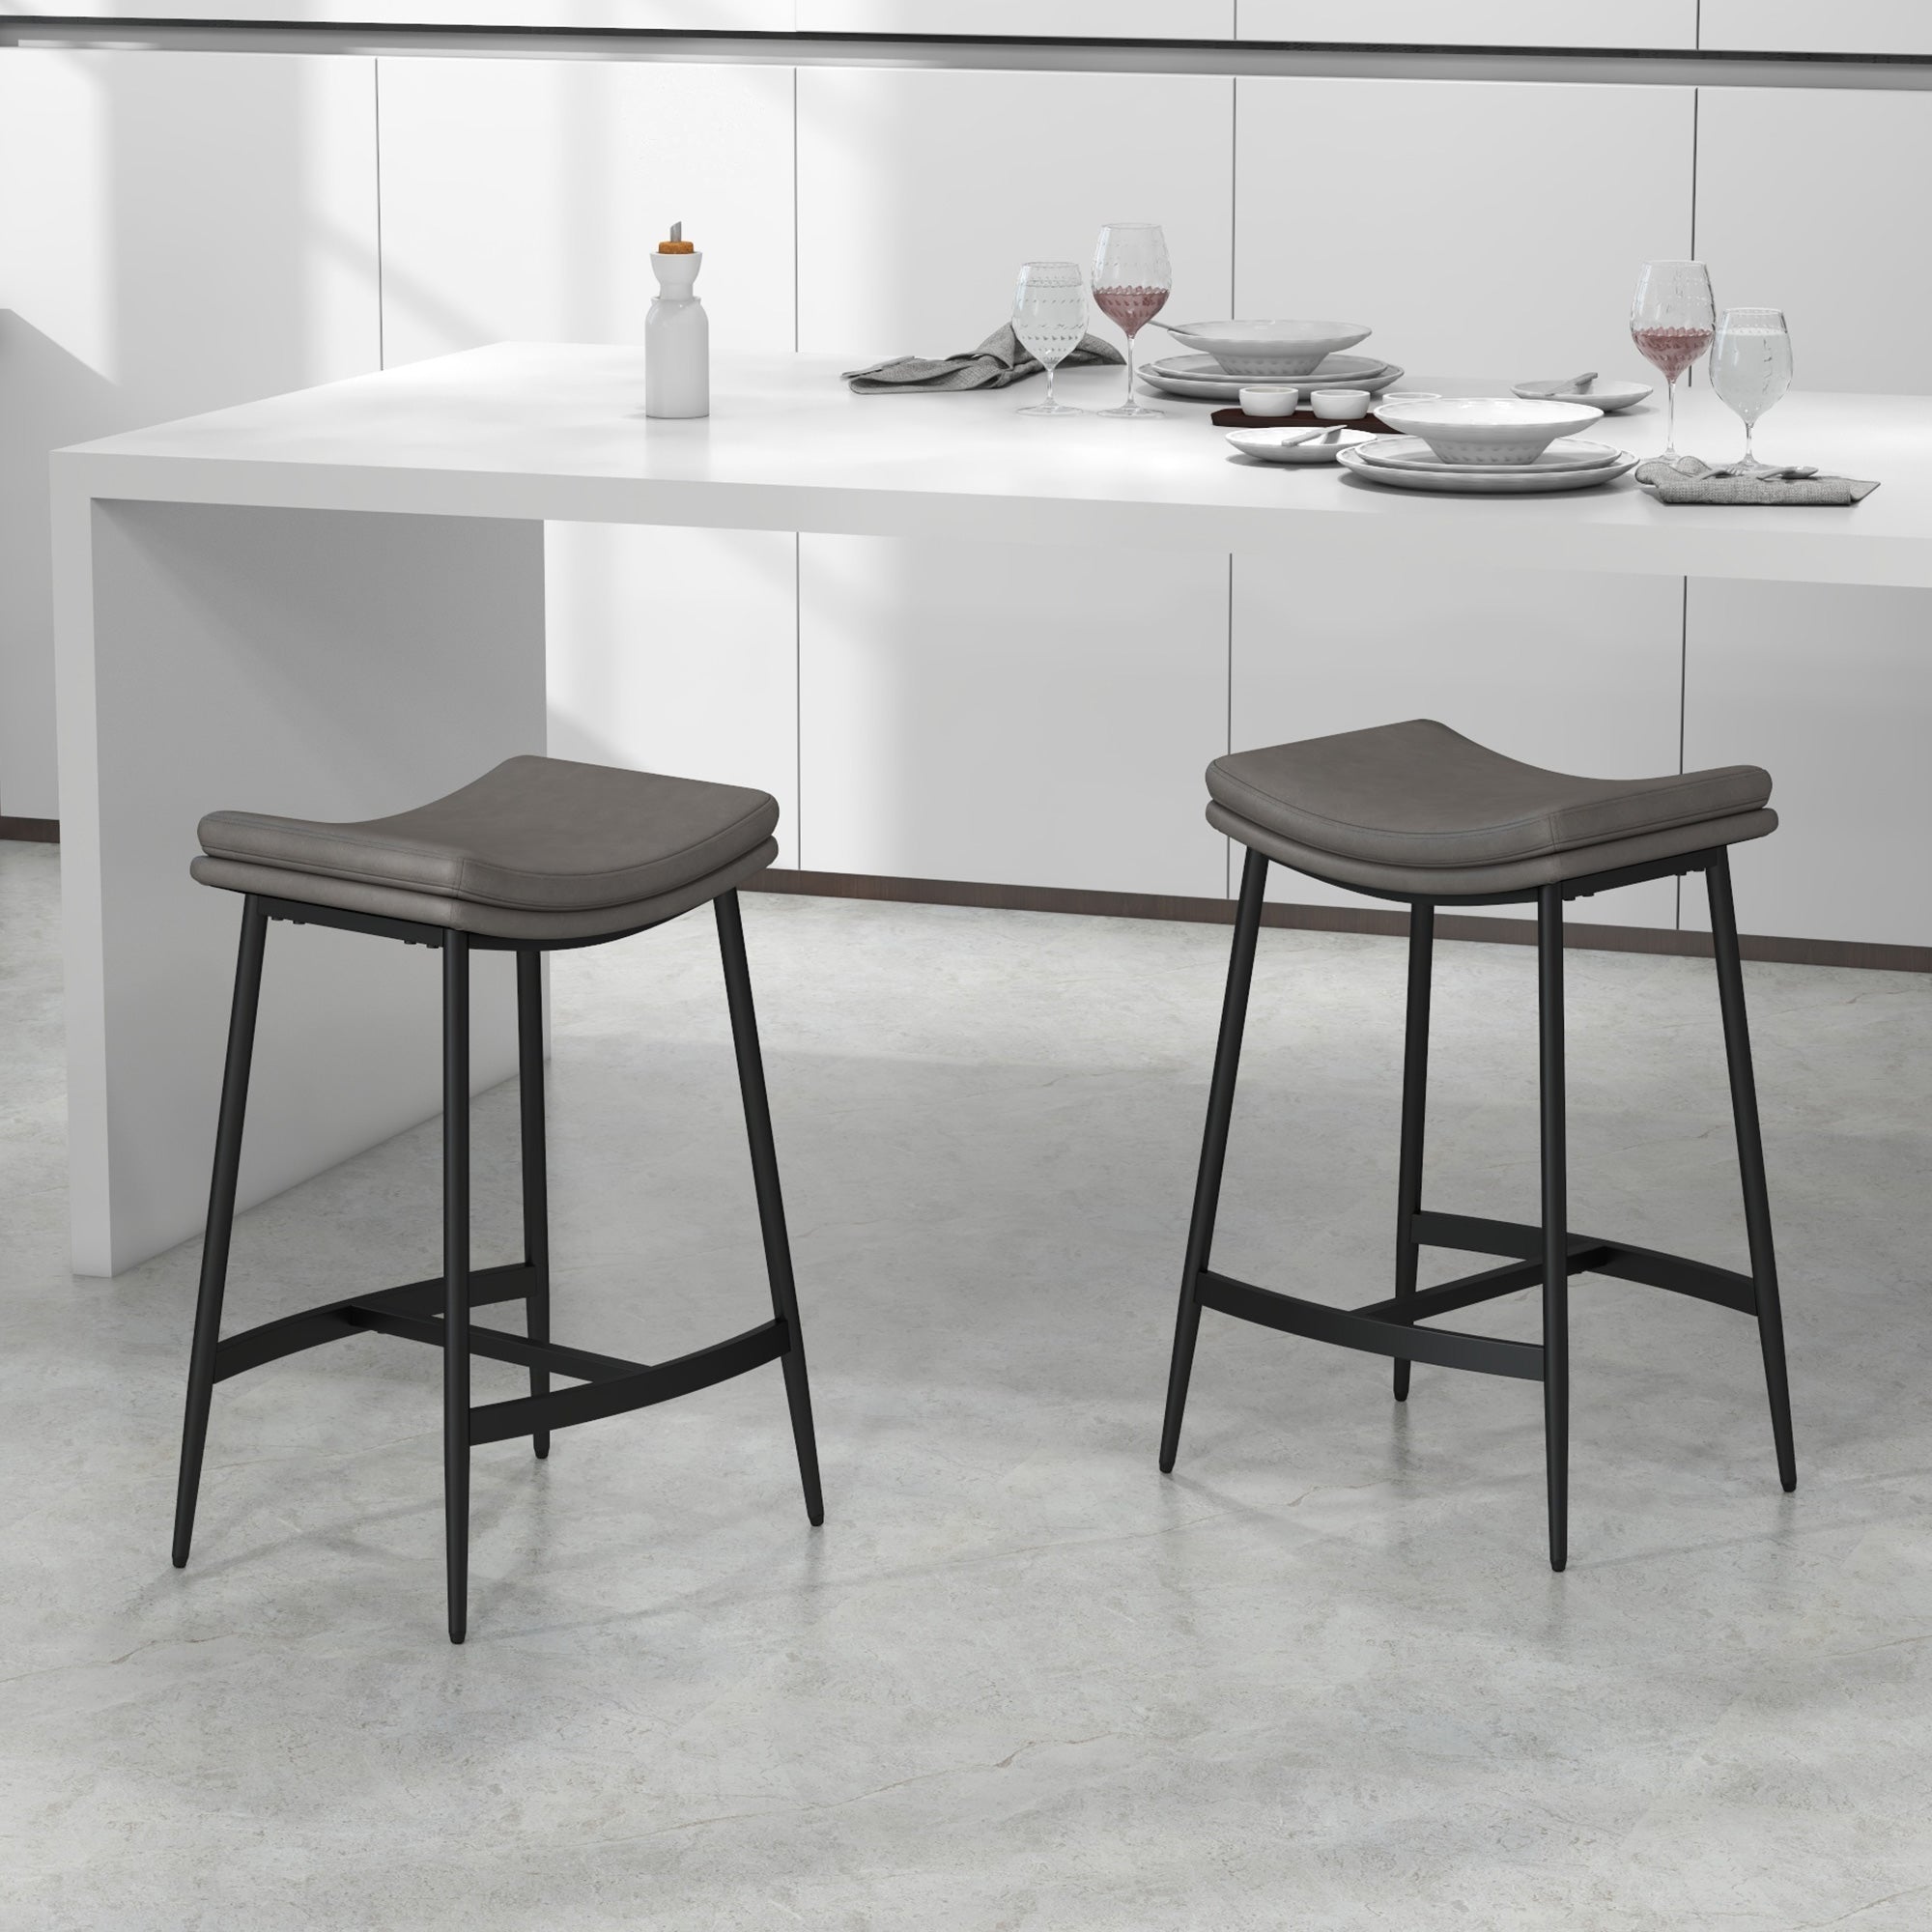 HOMCOM Kitchen Stools Set of 2, Microfibre Upholstered Barstools, Industrial Bar Chairs with Curved Seat and Steel Frame - TovaHaus